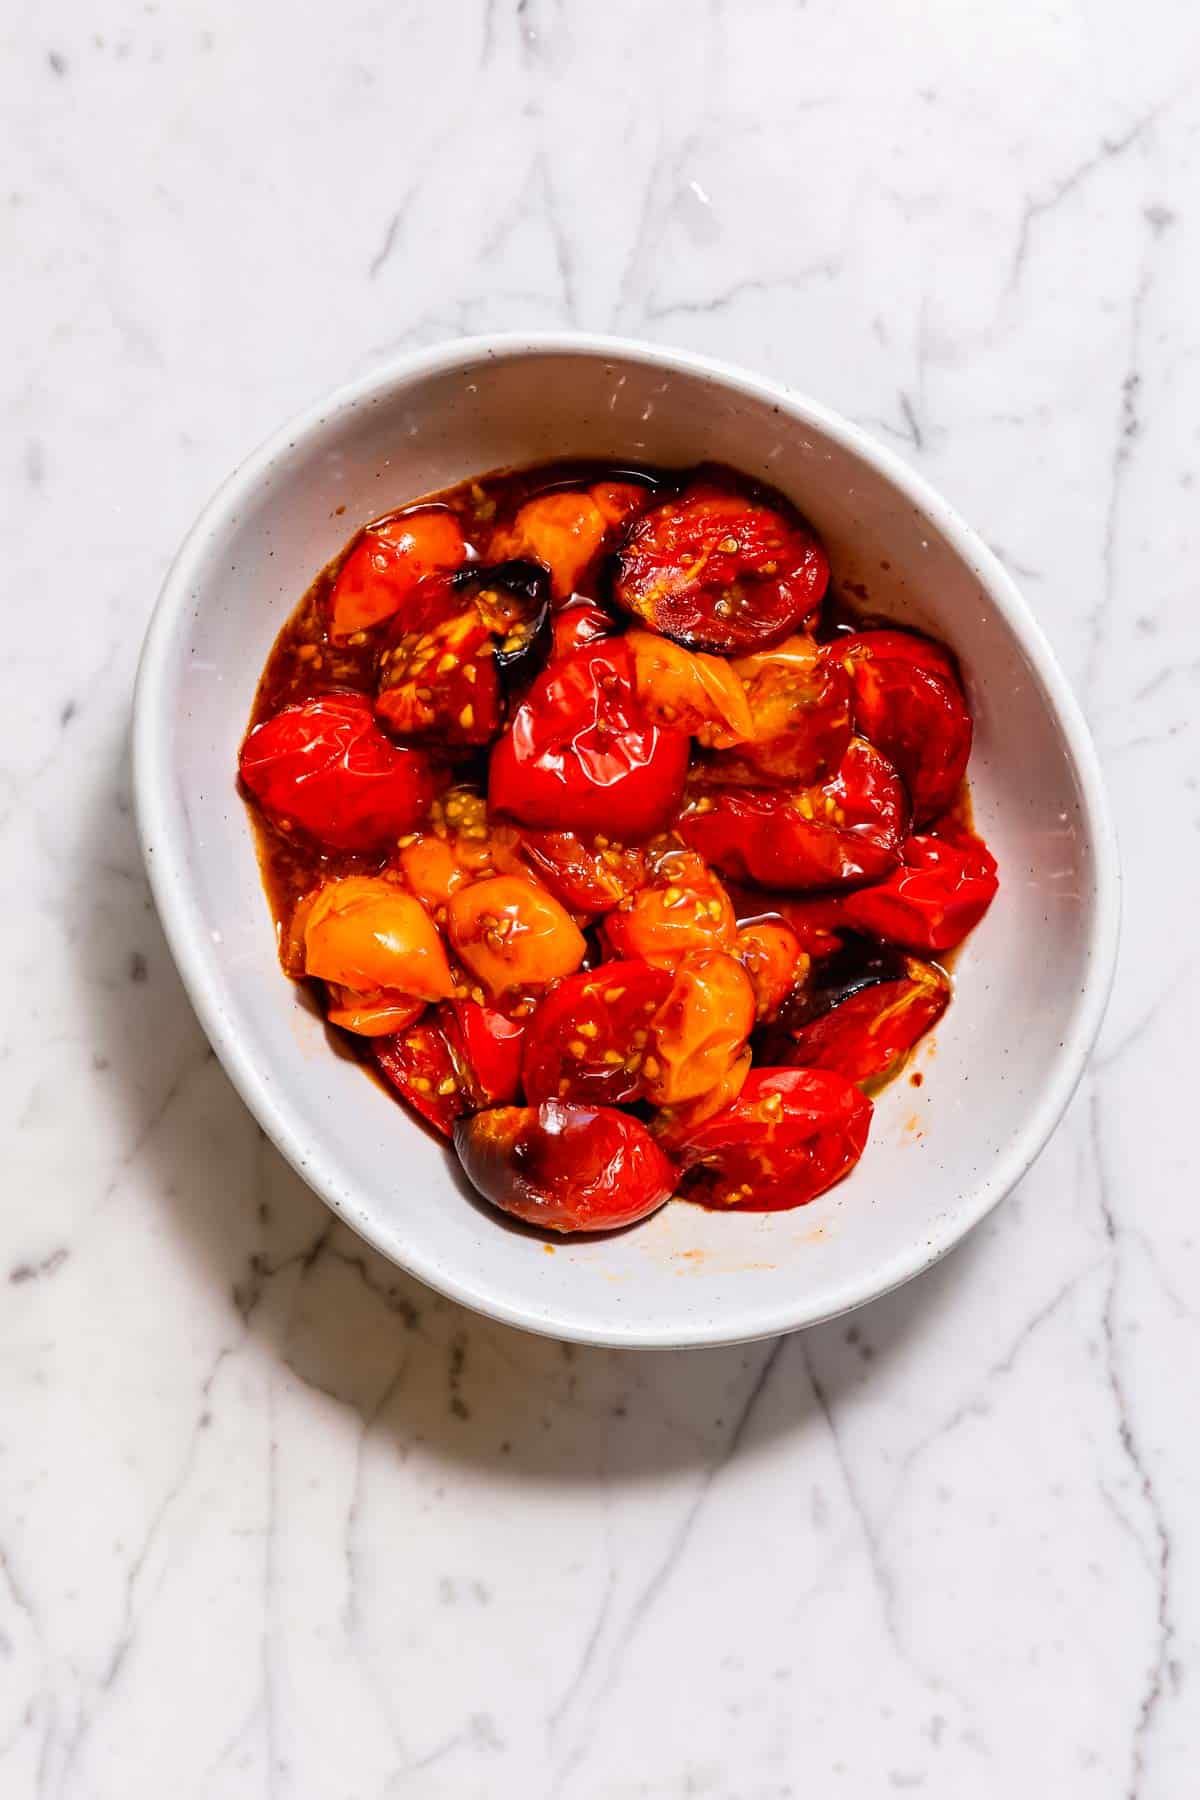 Cherry tomatoes roasted in an air fryer gathered in a white bowl on a marble counter.